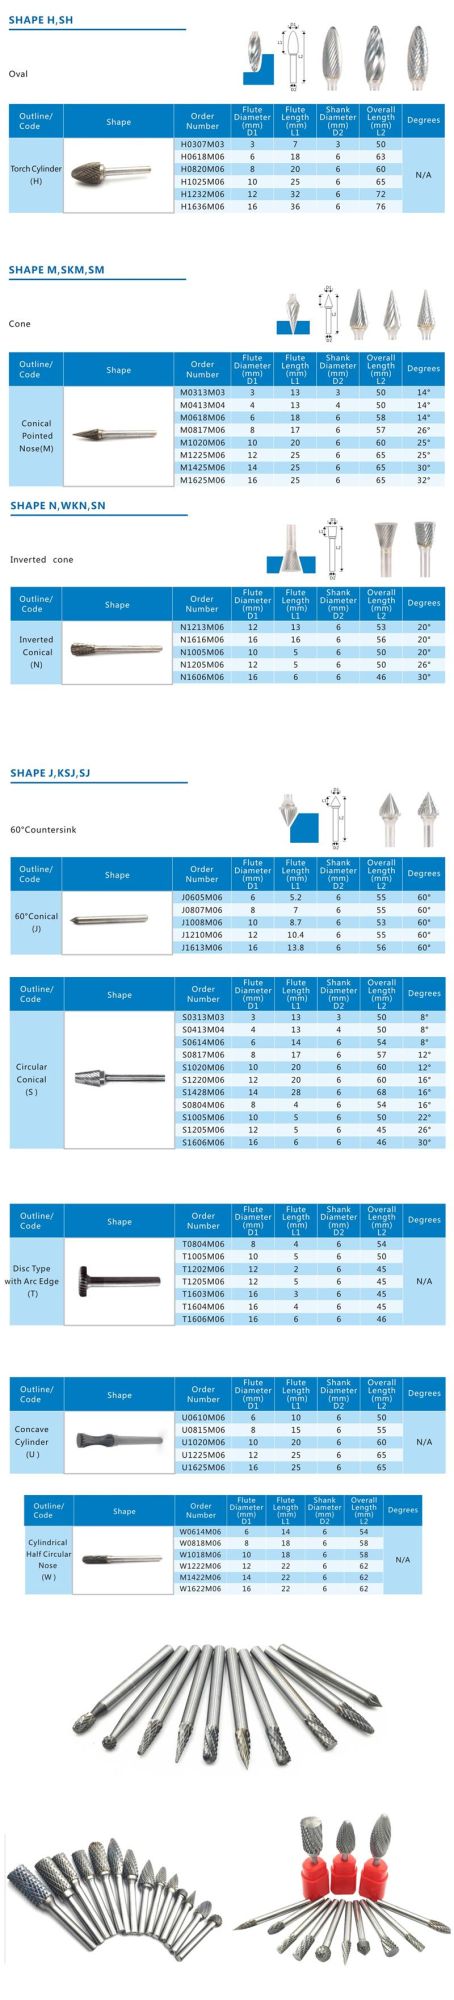 Cemented Carbide Double Cutter Burrs for Grinding Metal Workpieces